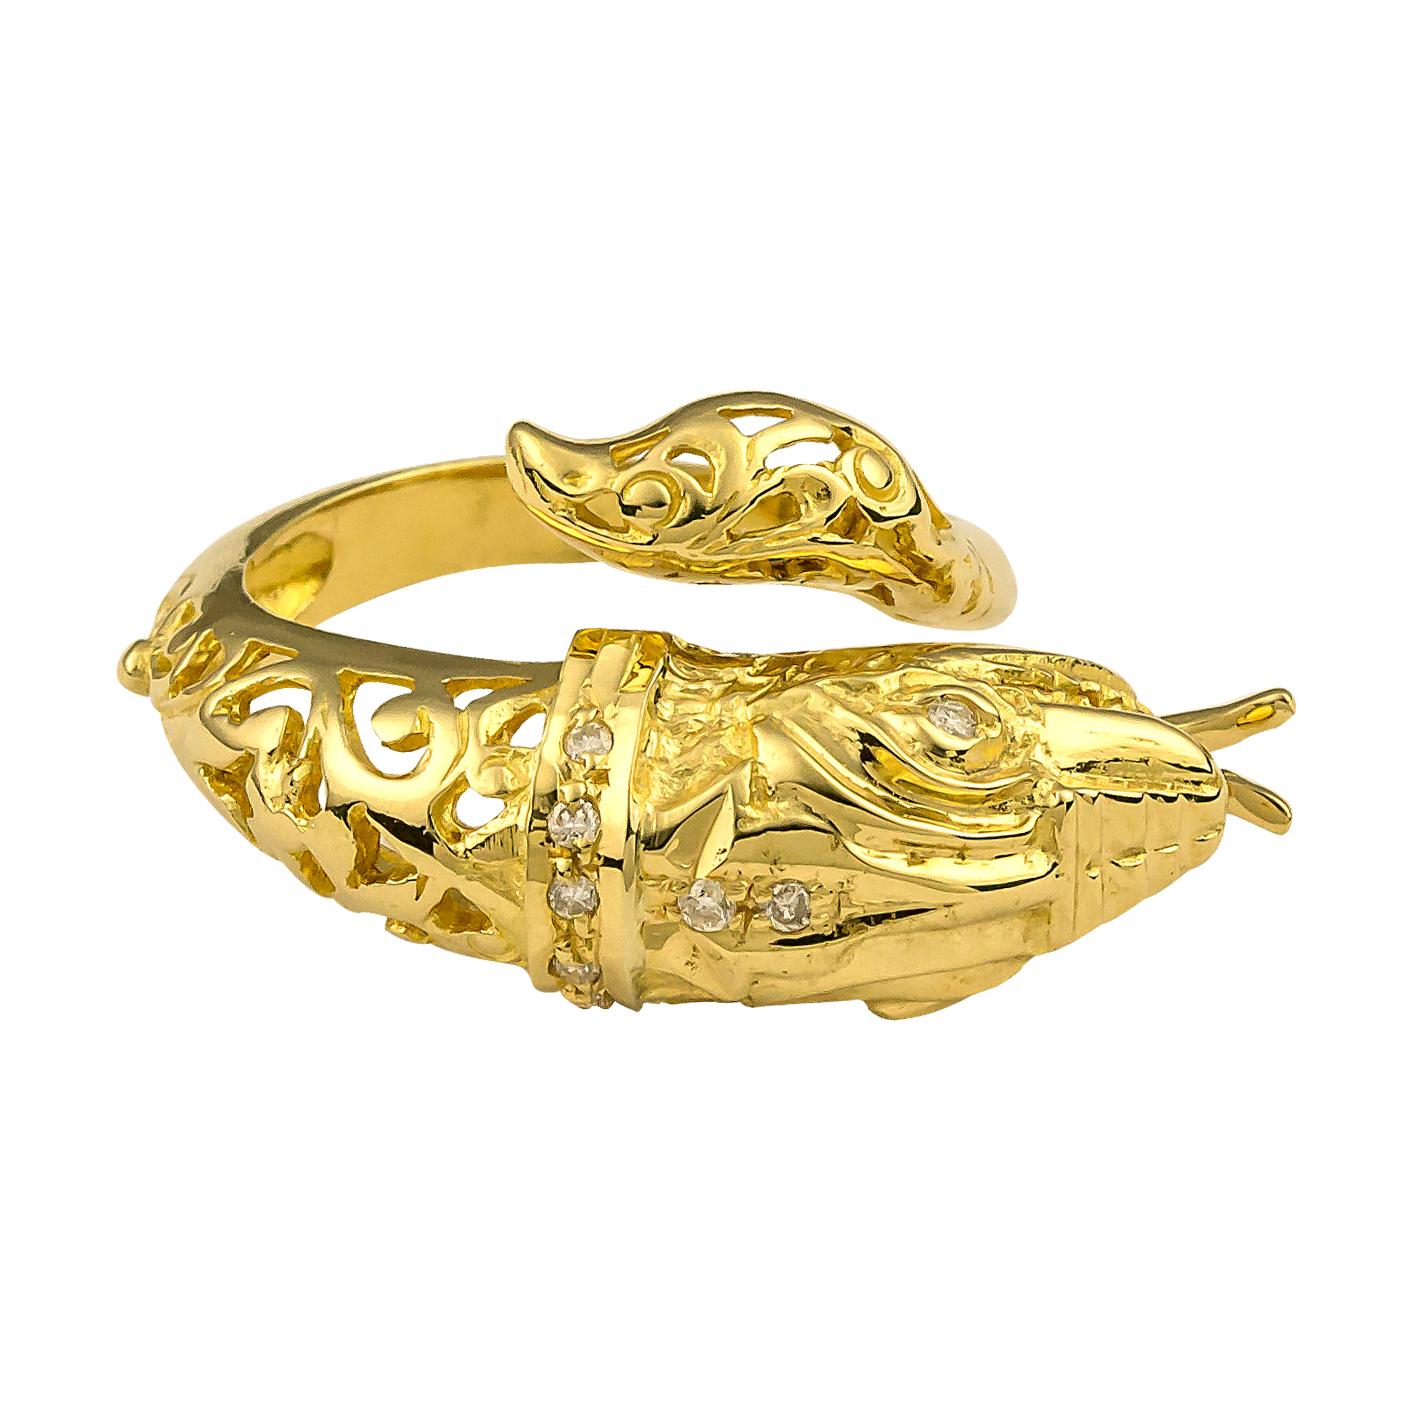 S.Georgios Designer Snake Ring is handmade from solid 18 Karat Yellow Gold and is microscopically decorated with Granulated details all custom-made. This unique Ring features one Snakehead with Diamonds for eyes, inspired from the Byzantine Museum,